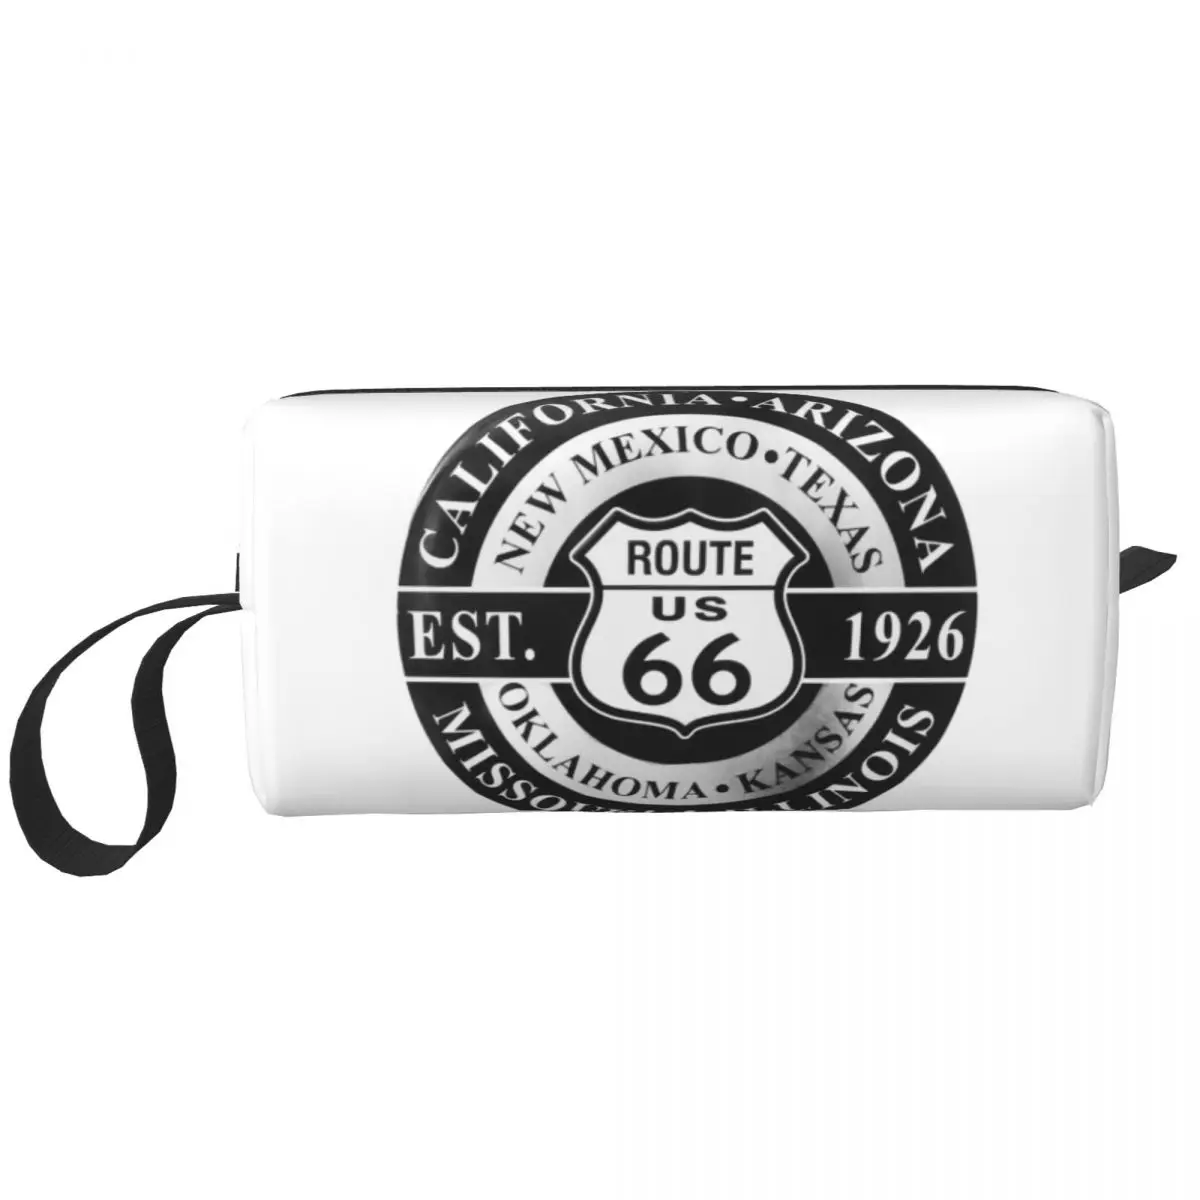 

Travel Americas Highway Route 66 Toiletry Bag Fashion USA Highway Cosmetic Makeup Organizer Women Beauty Storage Dopp Kit Case